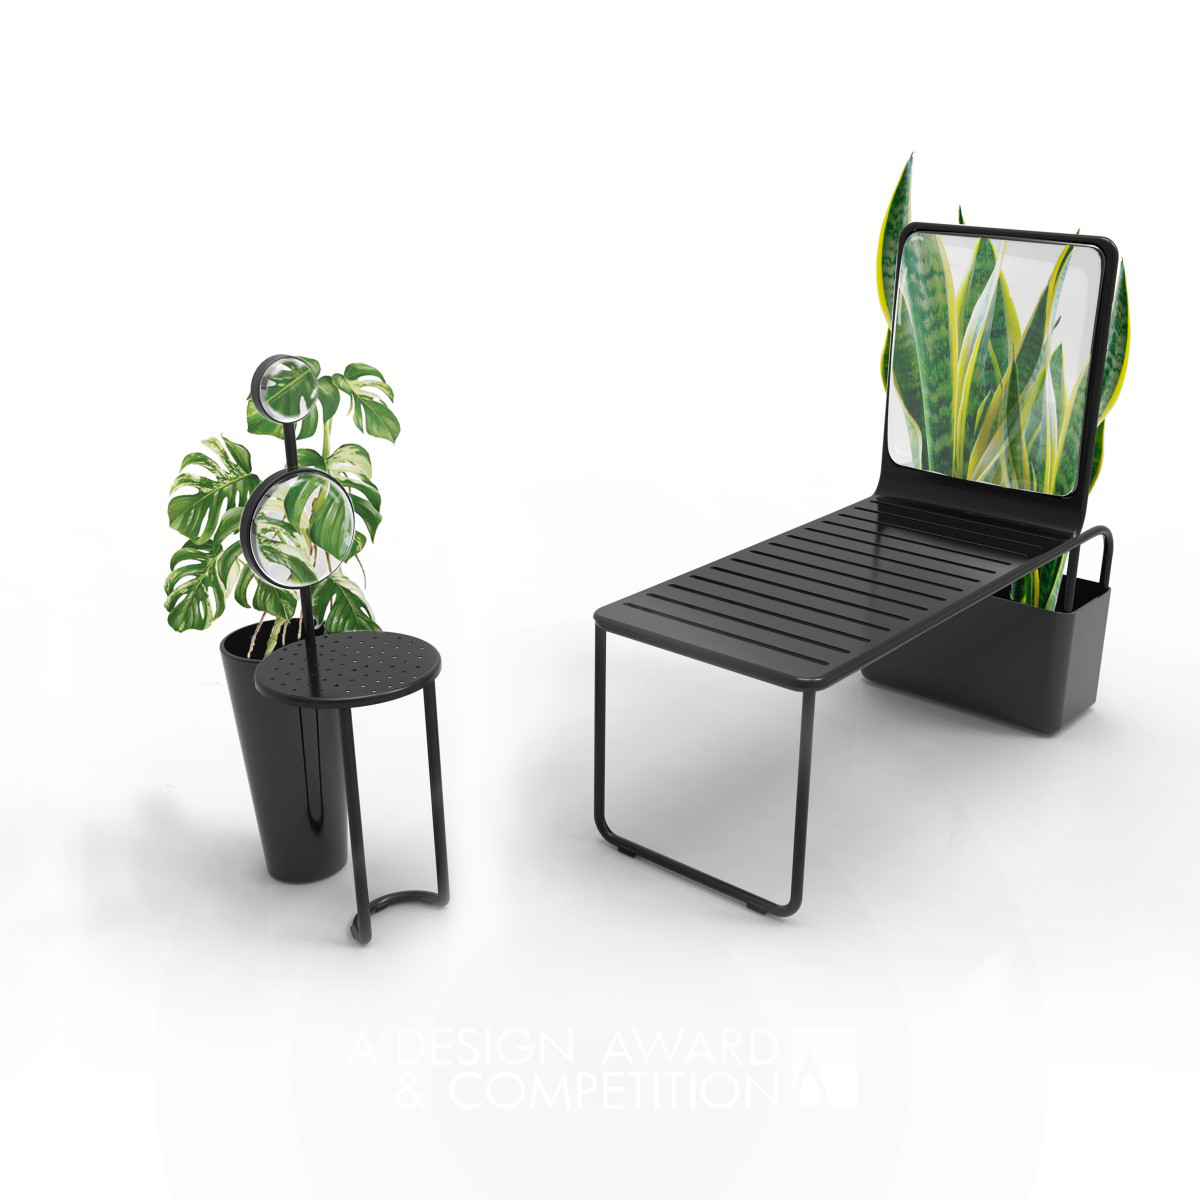 Mirror Chair Chair with magnifying glass and planter by Guangcai Yin and Sha Yang Bronze Furniture Design Award Winner 2018 